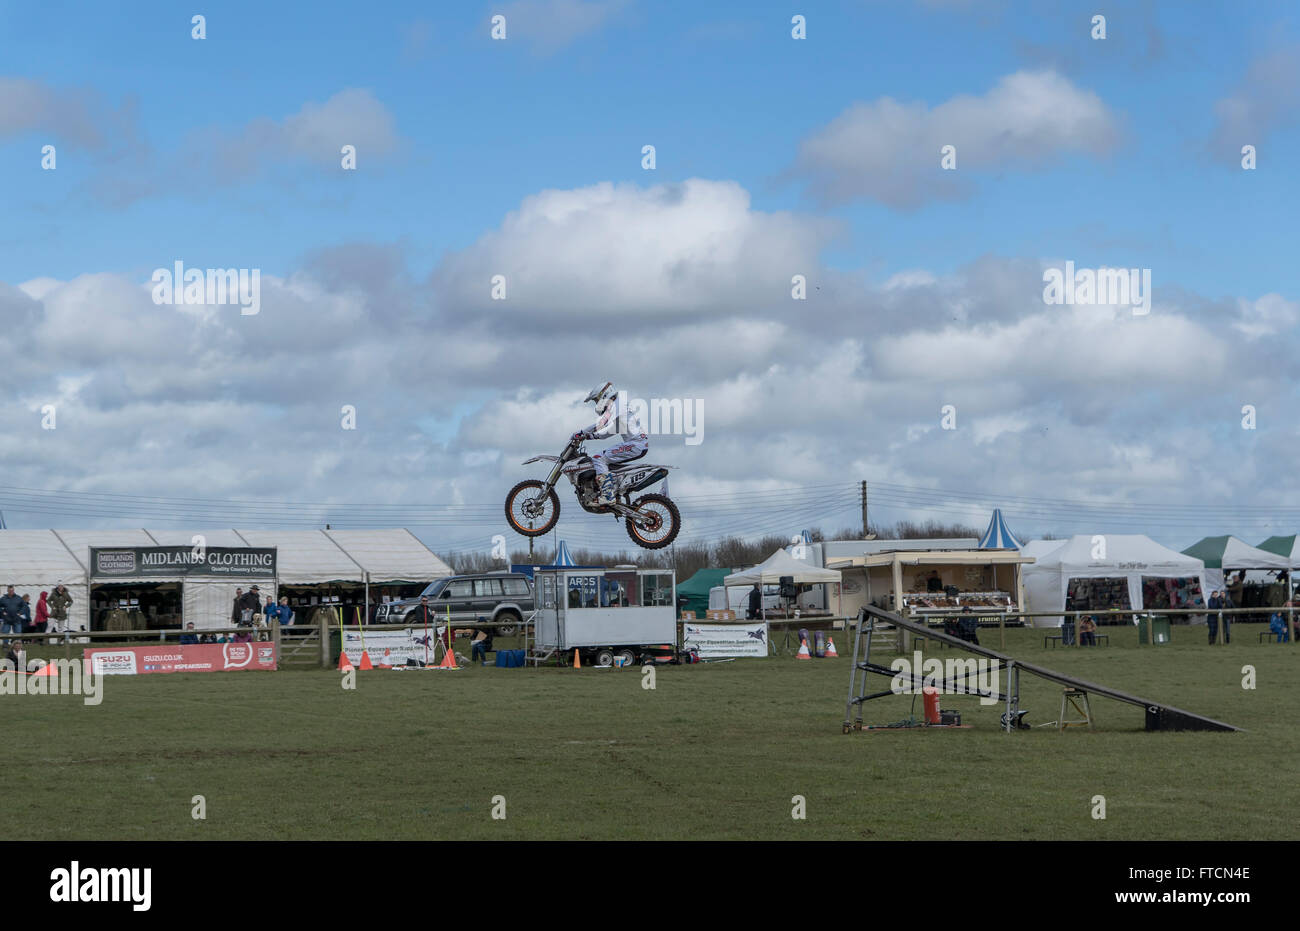 The Living Heritage Country show.The stunt mania motor cycle display team. Credit:  Scott Carruthers/Alamy Live News Stock Photo